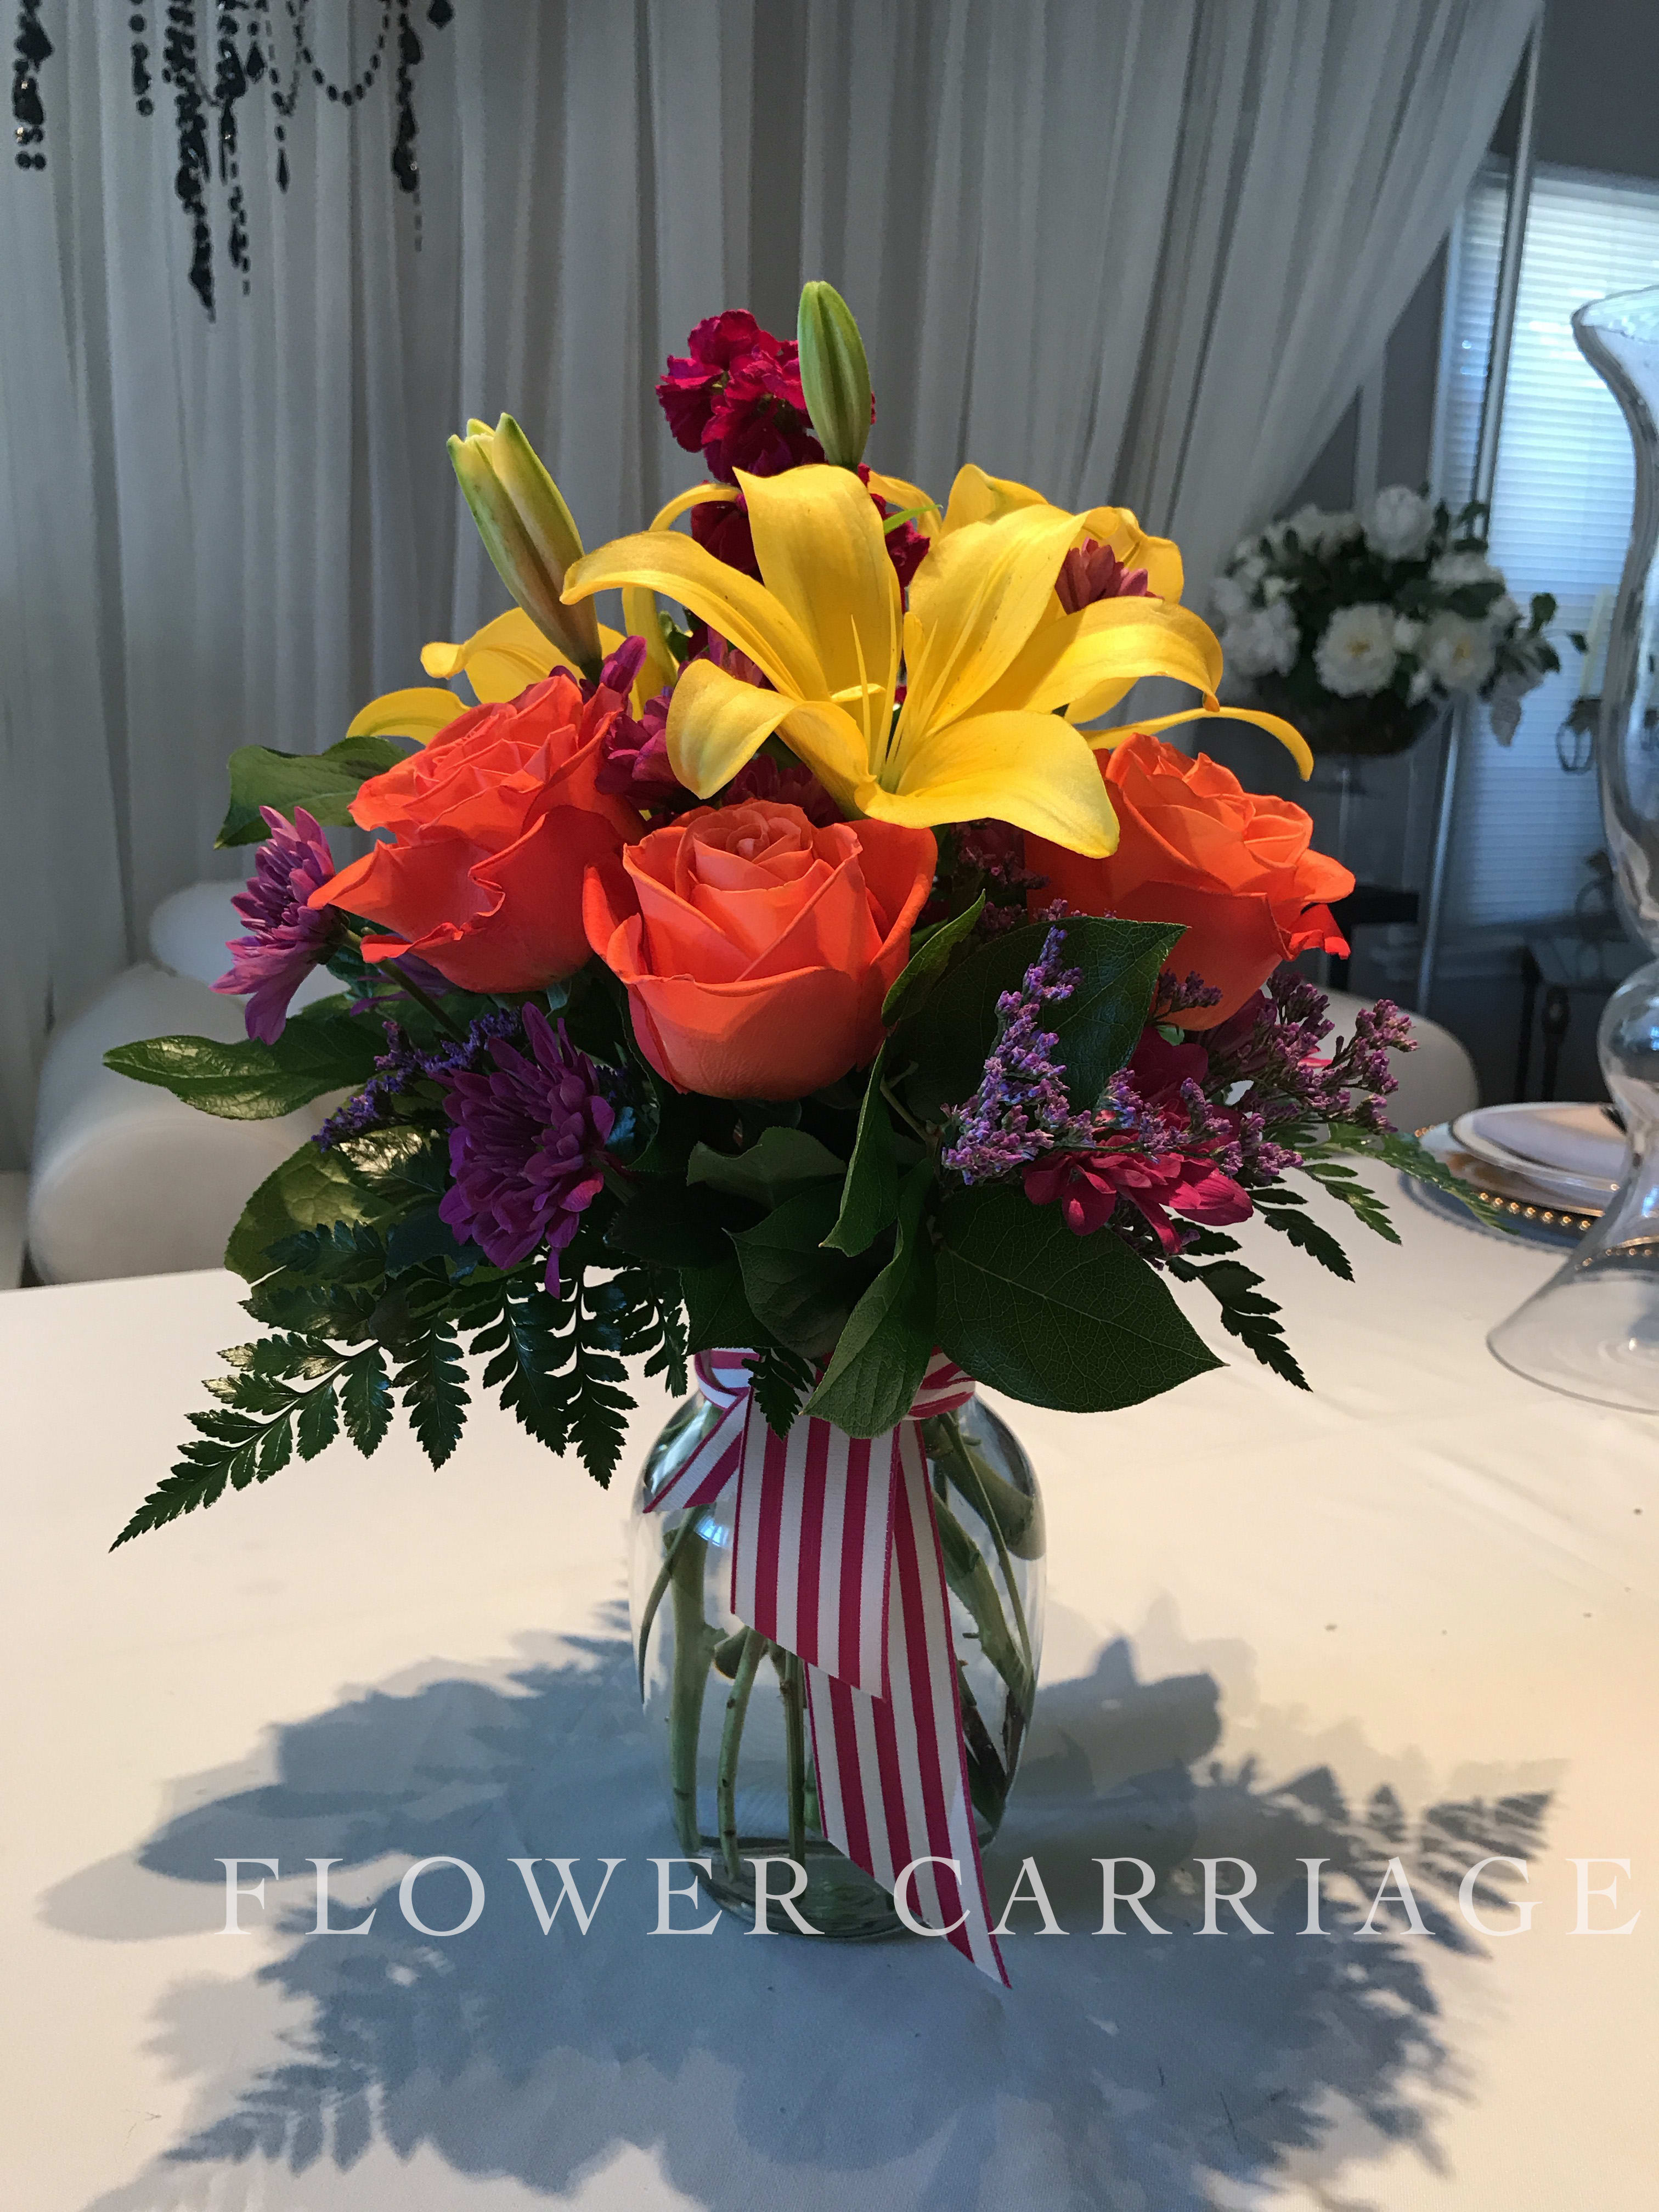 Brightest Smile By Flower Carriage  - The brightest the biggest smile you will get, with this beautiful bouquet. Lilies, Ecuadorian Roses, Stock and Misty. 